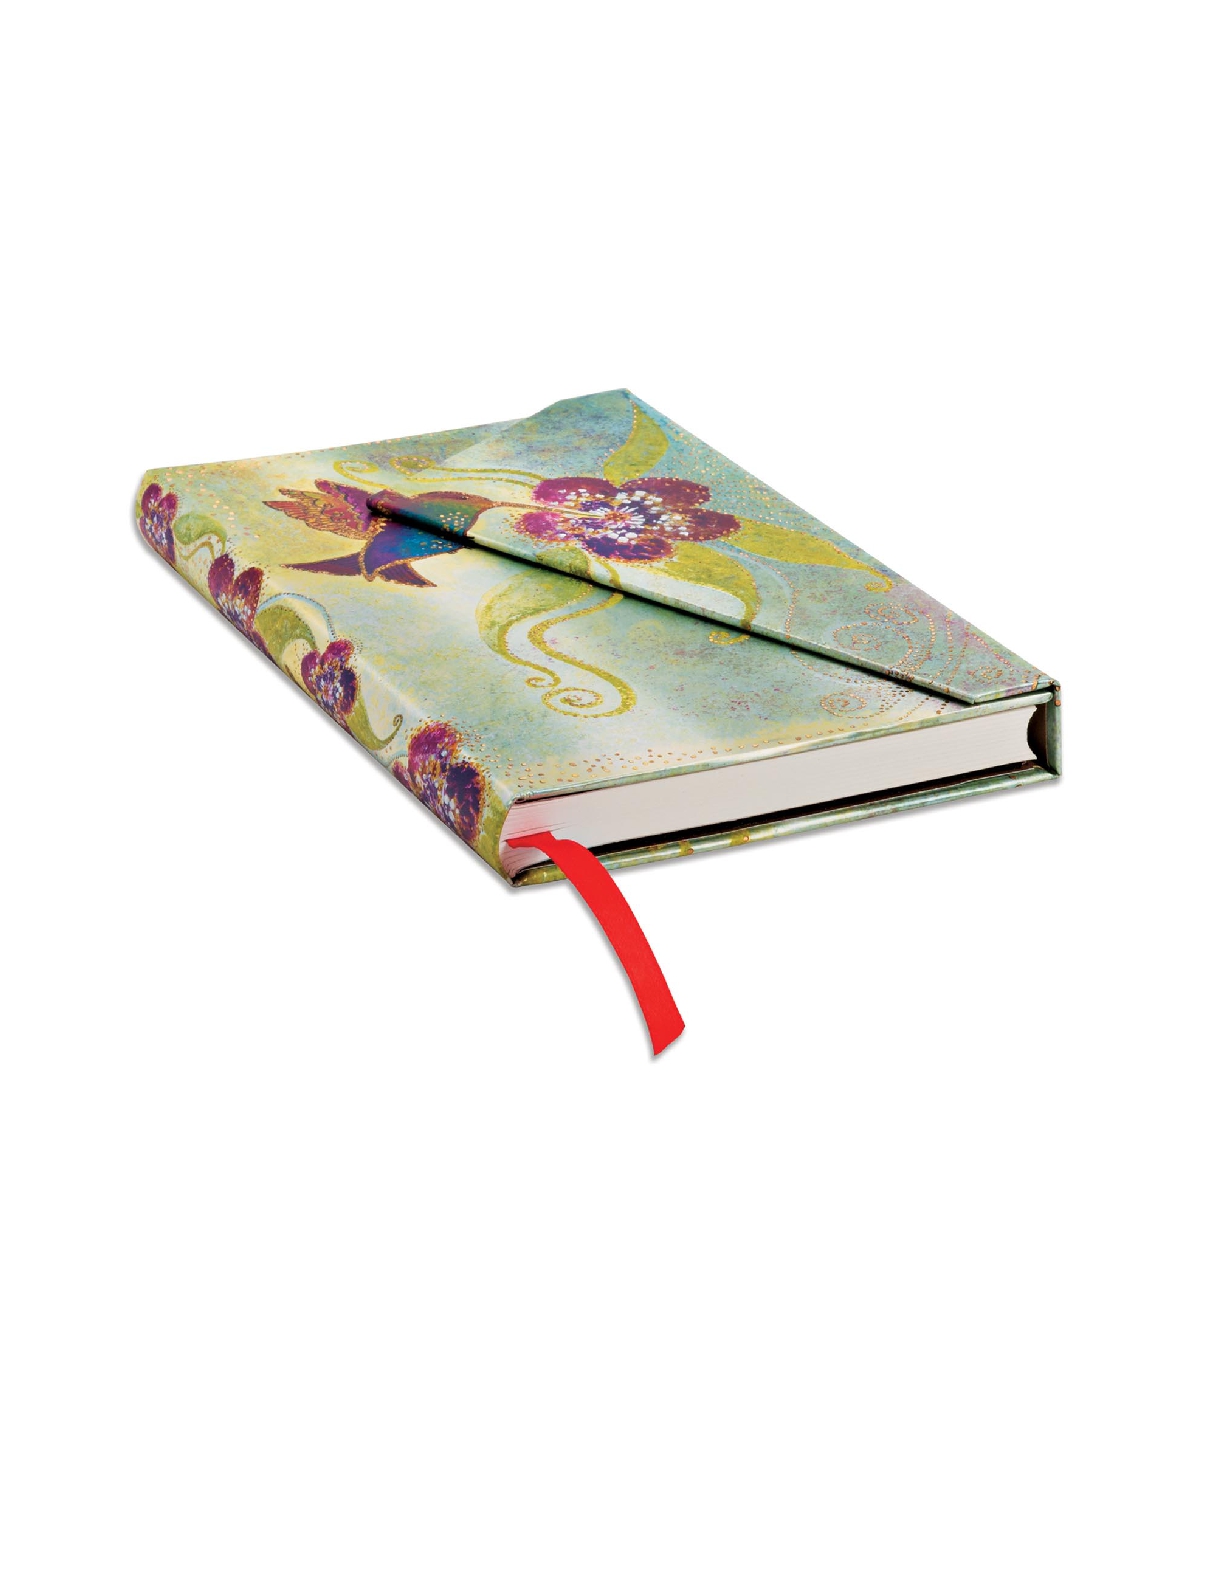 Hummingbird, Whimsical Creations, Hardcover, Mini, Lined, Wrap Closure, 176 Pg, 85 GSM